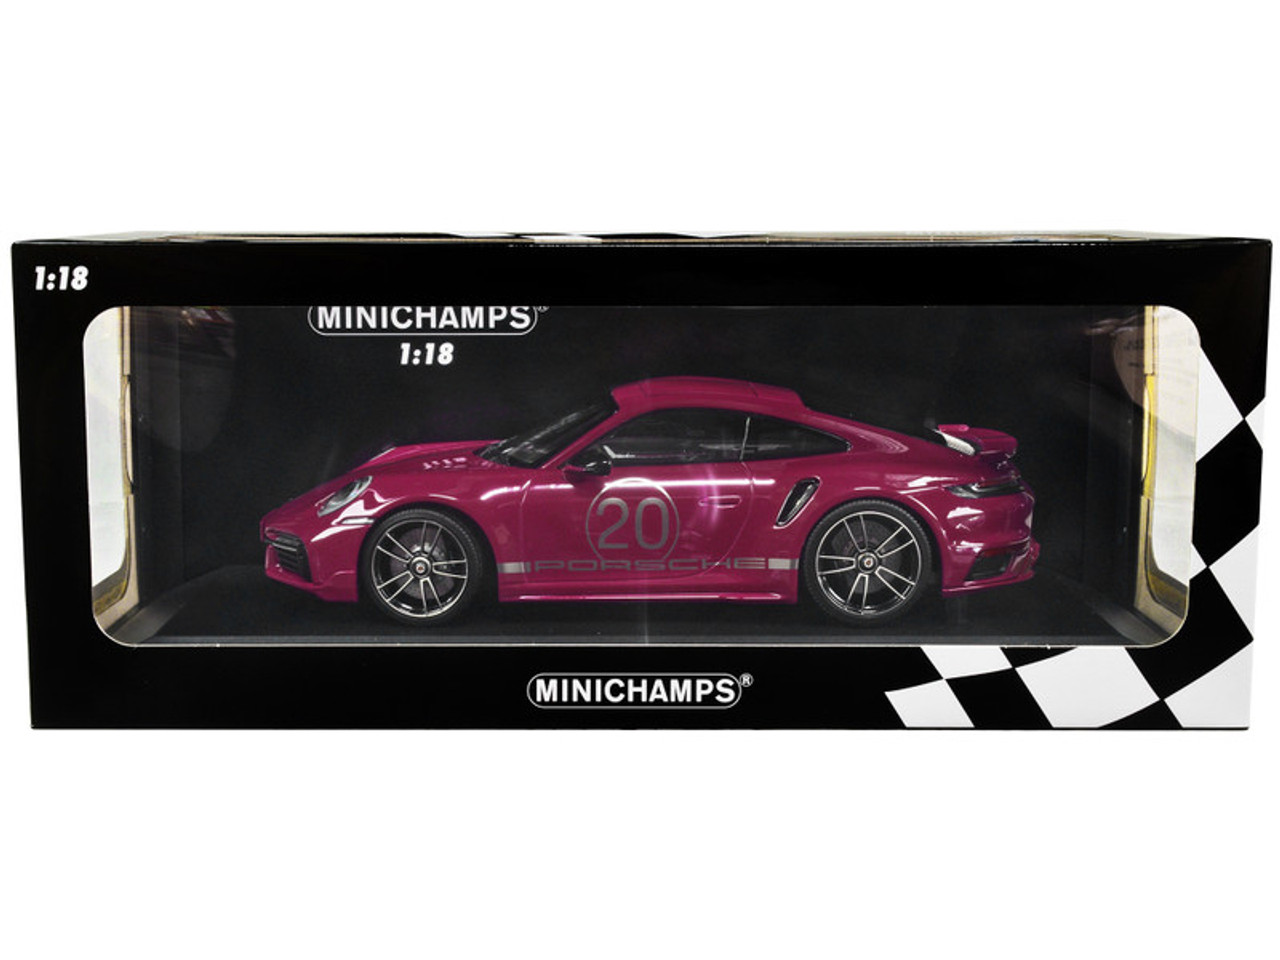 1/18 Minichamps 2021 Porsche 911 Turbo S with SportDesign Package #20 Red Violet with Silver Stripes Limited Edition to 504 Pieces